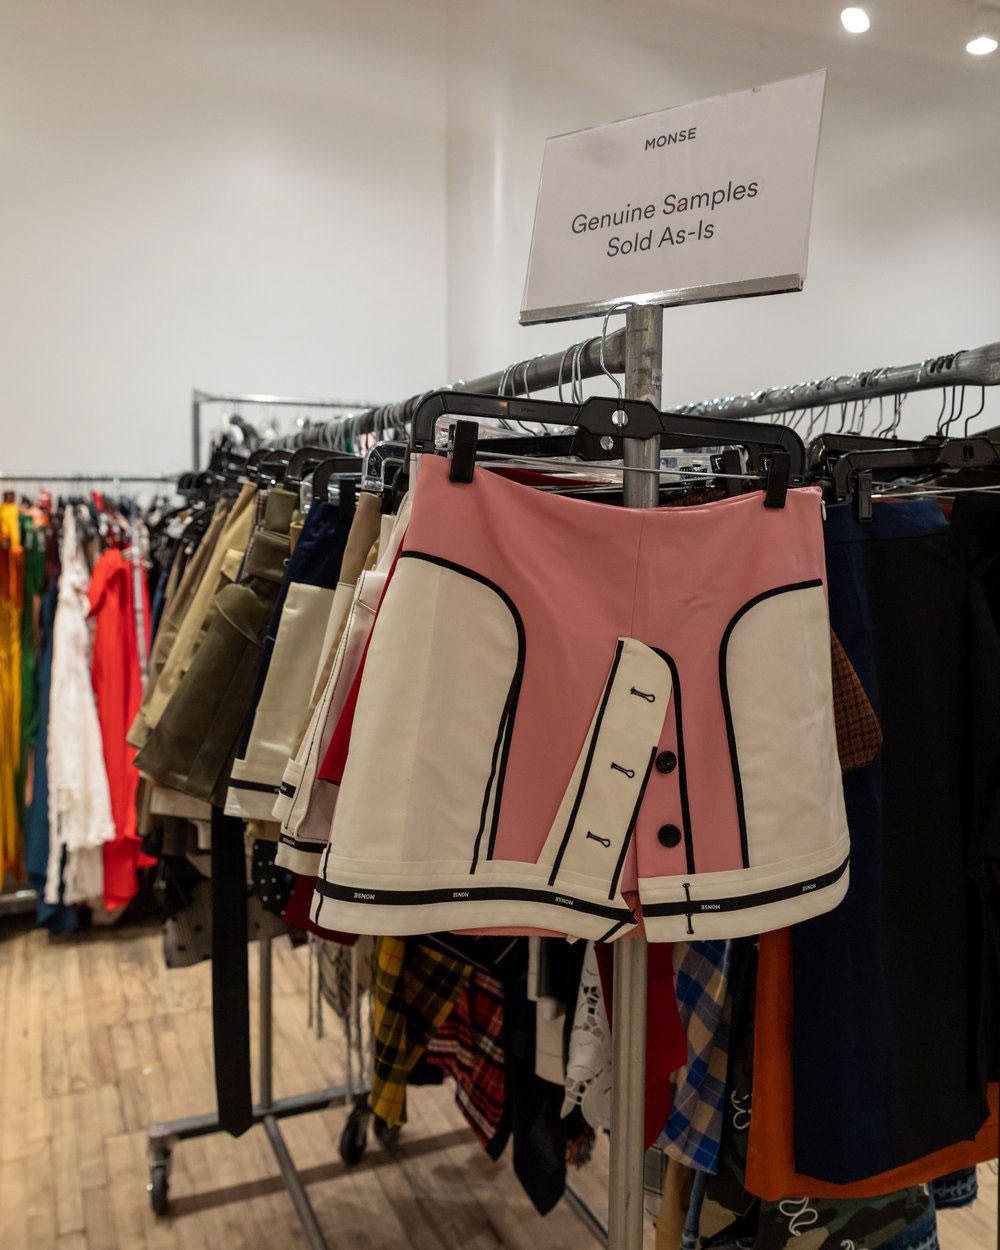 MONSE Sample Sale in Images